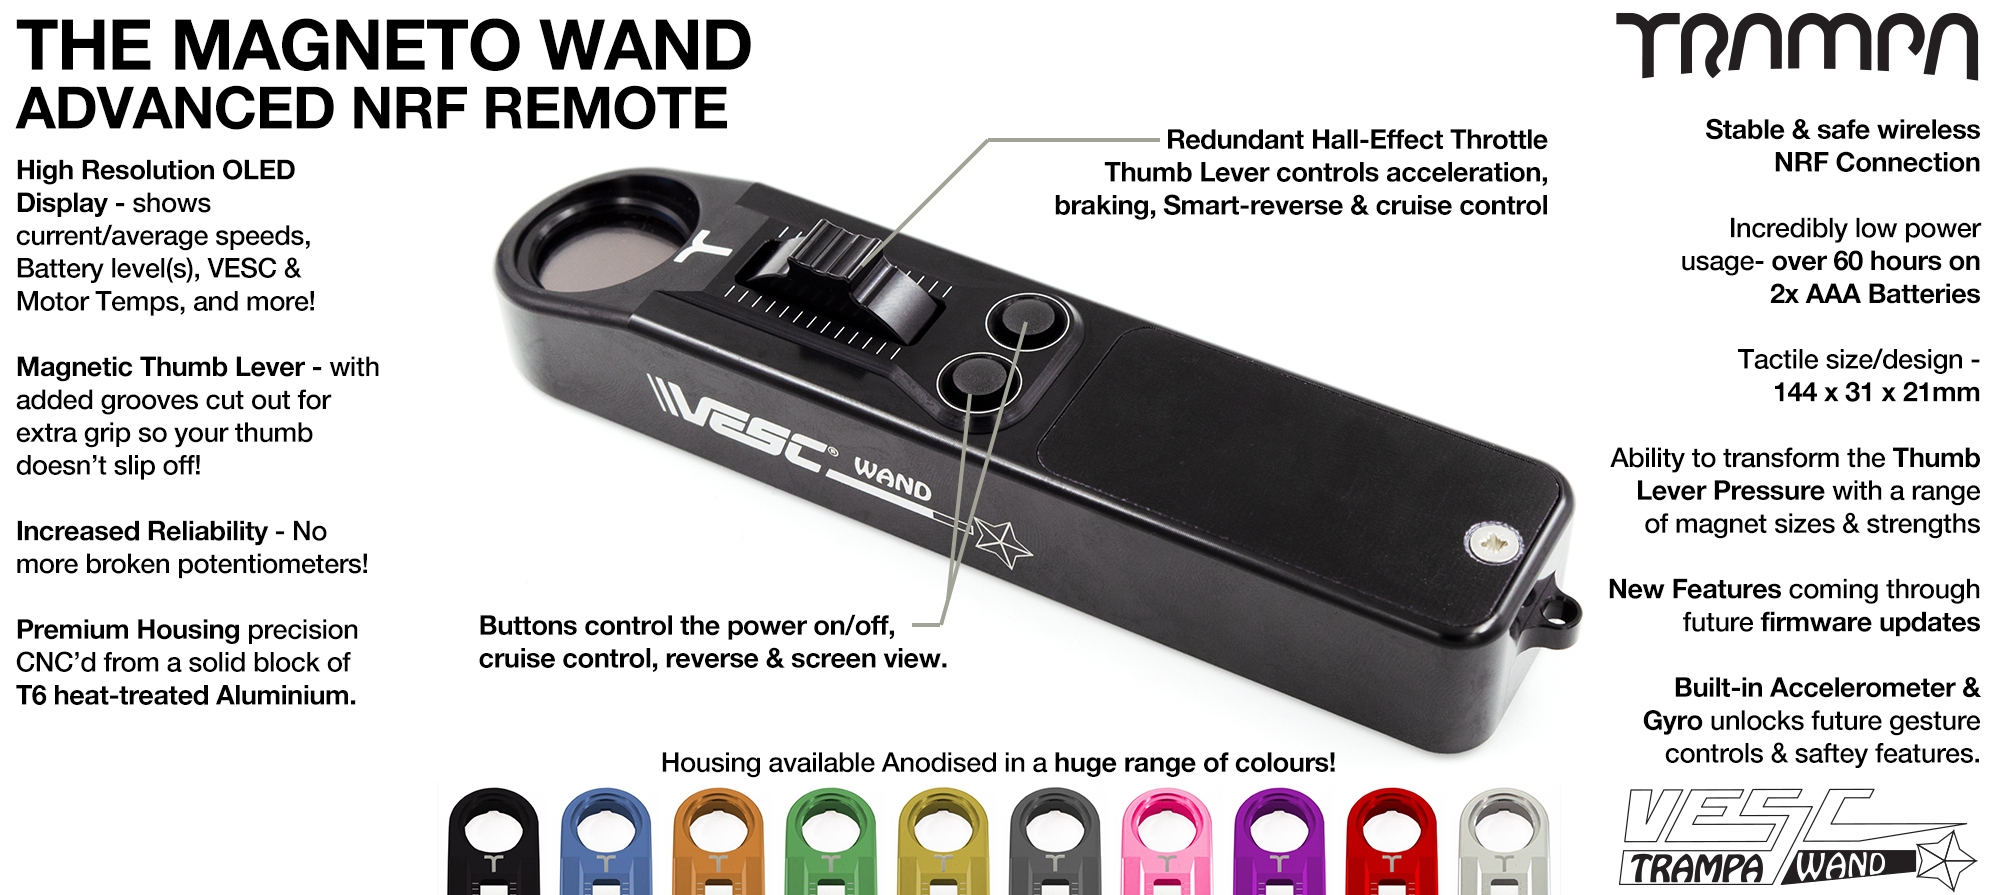 TRAMPA's VESC WAND Remote Control is due to arrive from the future very soon 